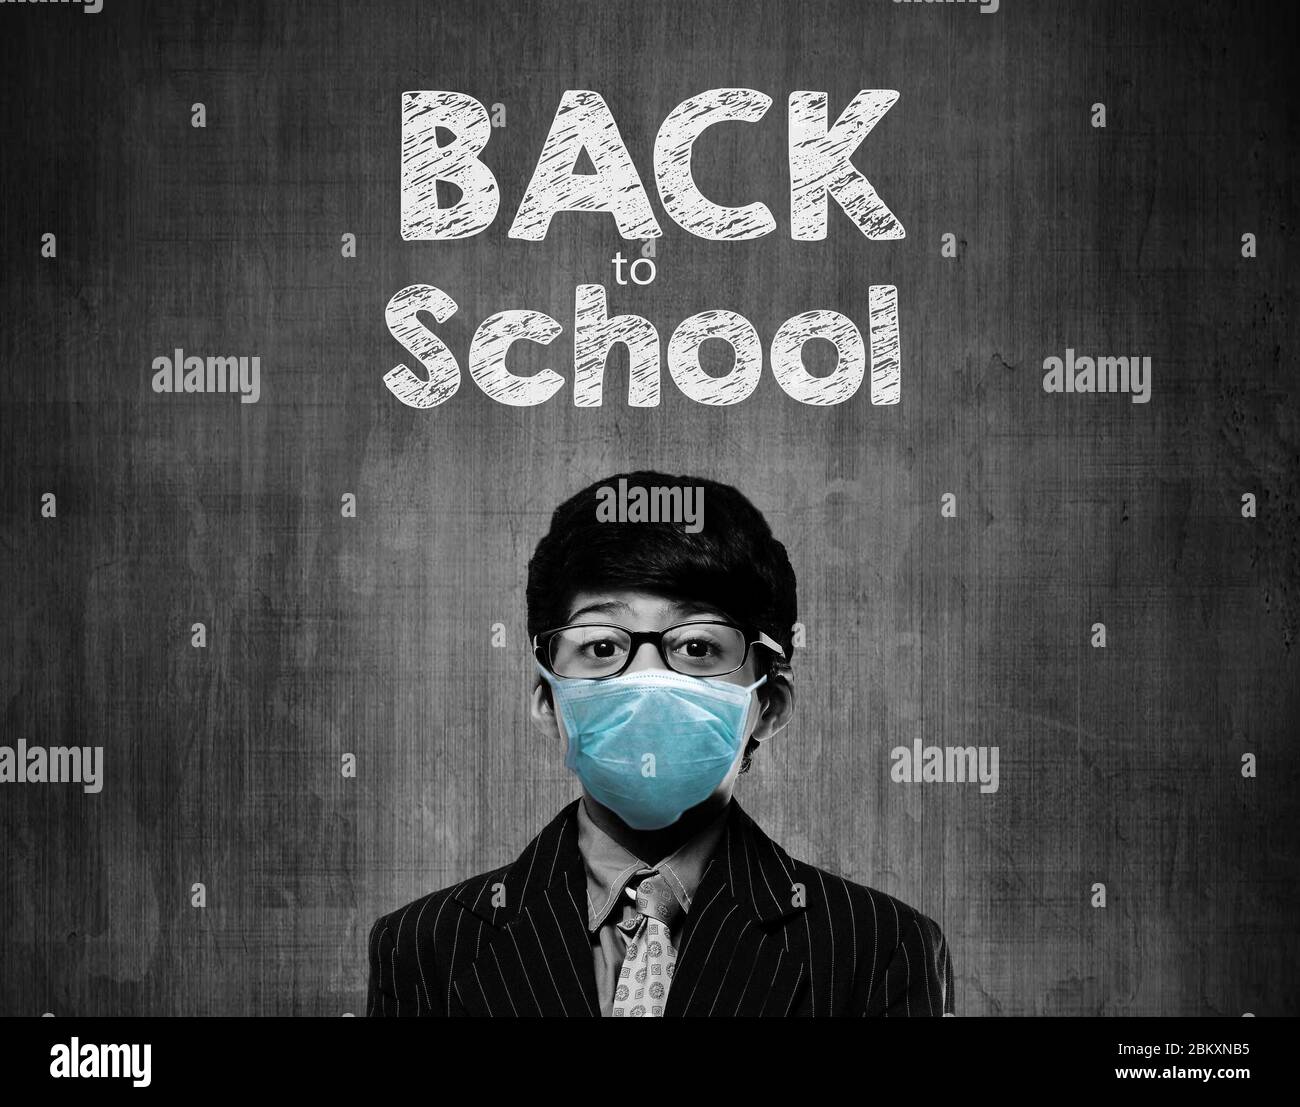 Back To School - Little School Kids Wearing Surgical Mask For Safety And Protection During Pandemic - Coronavirus - Covid 19 Stock Photo